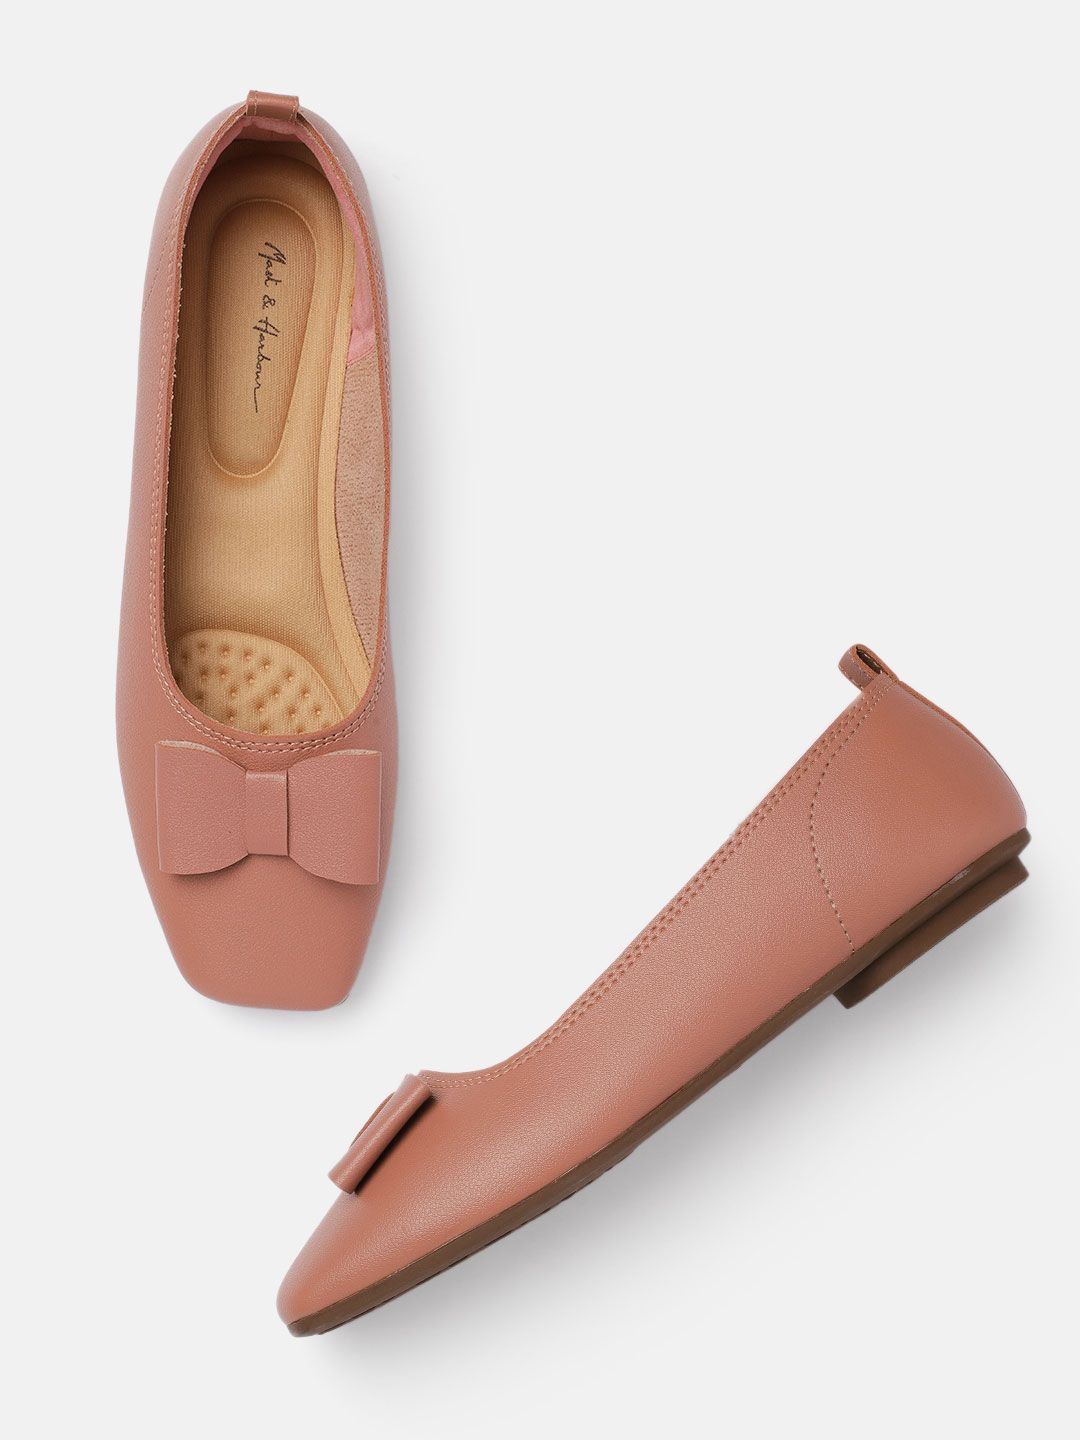 Mast & Harbour Women Rose Ballerinas with Bows Flats Price in India